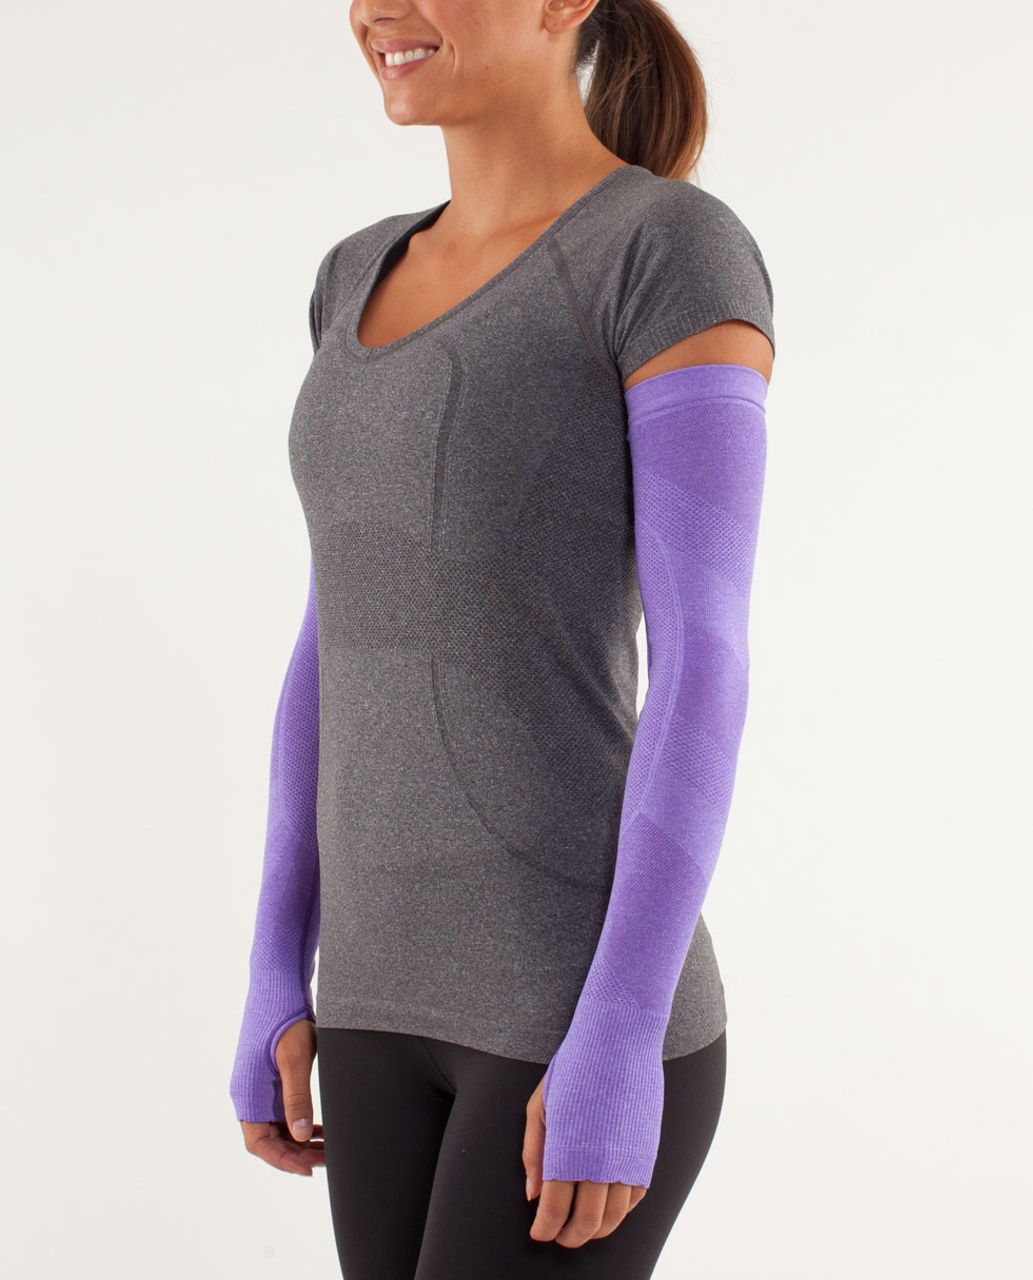 Lululemon Swiftly Armwarmers *Special Edition - Power Purple